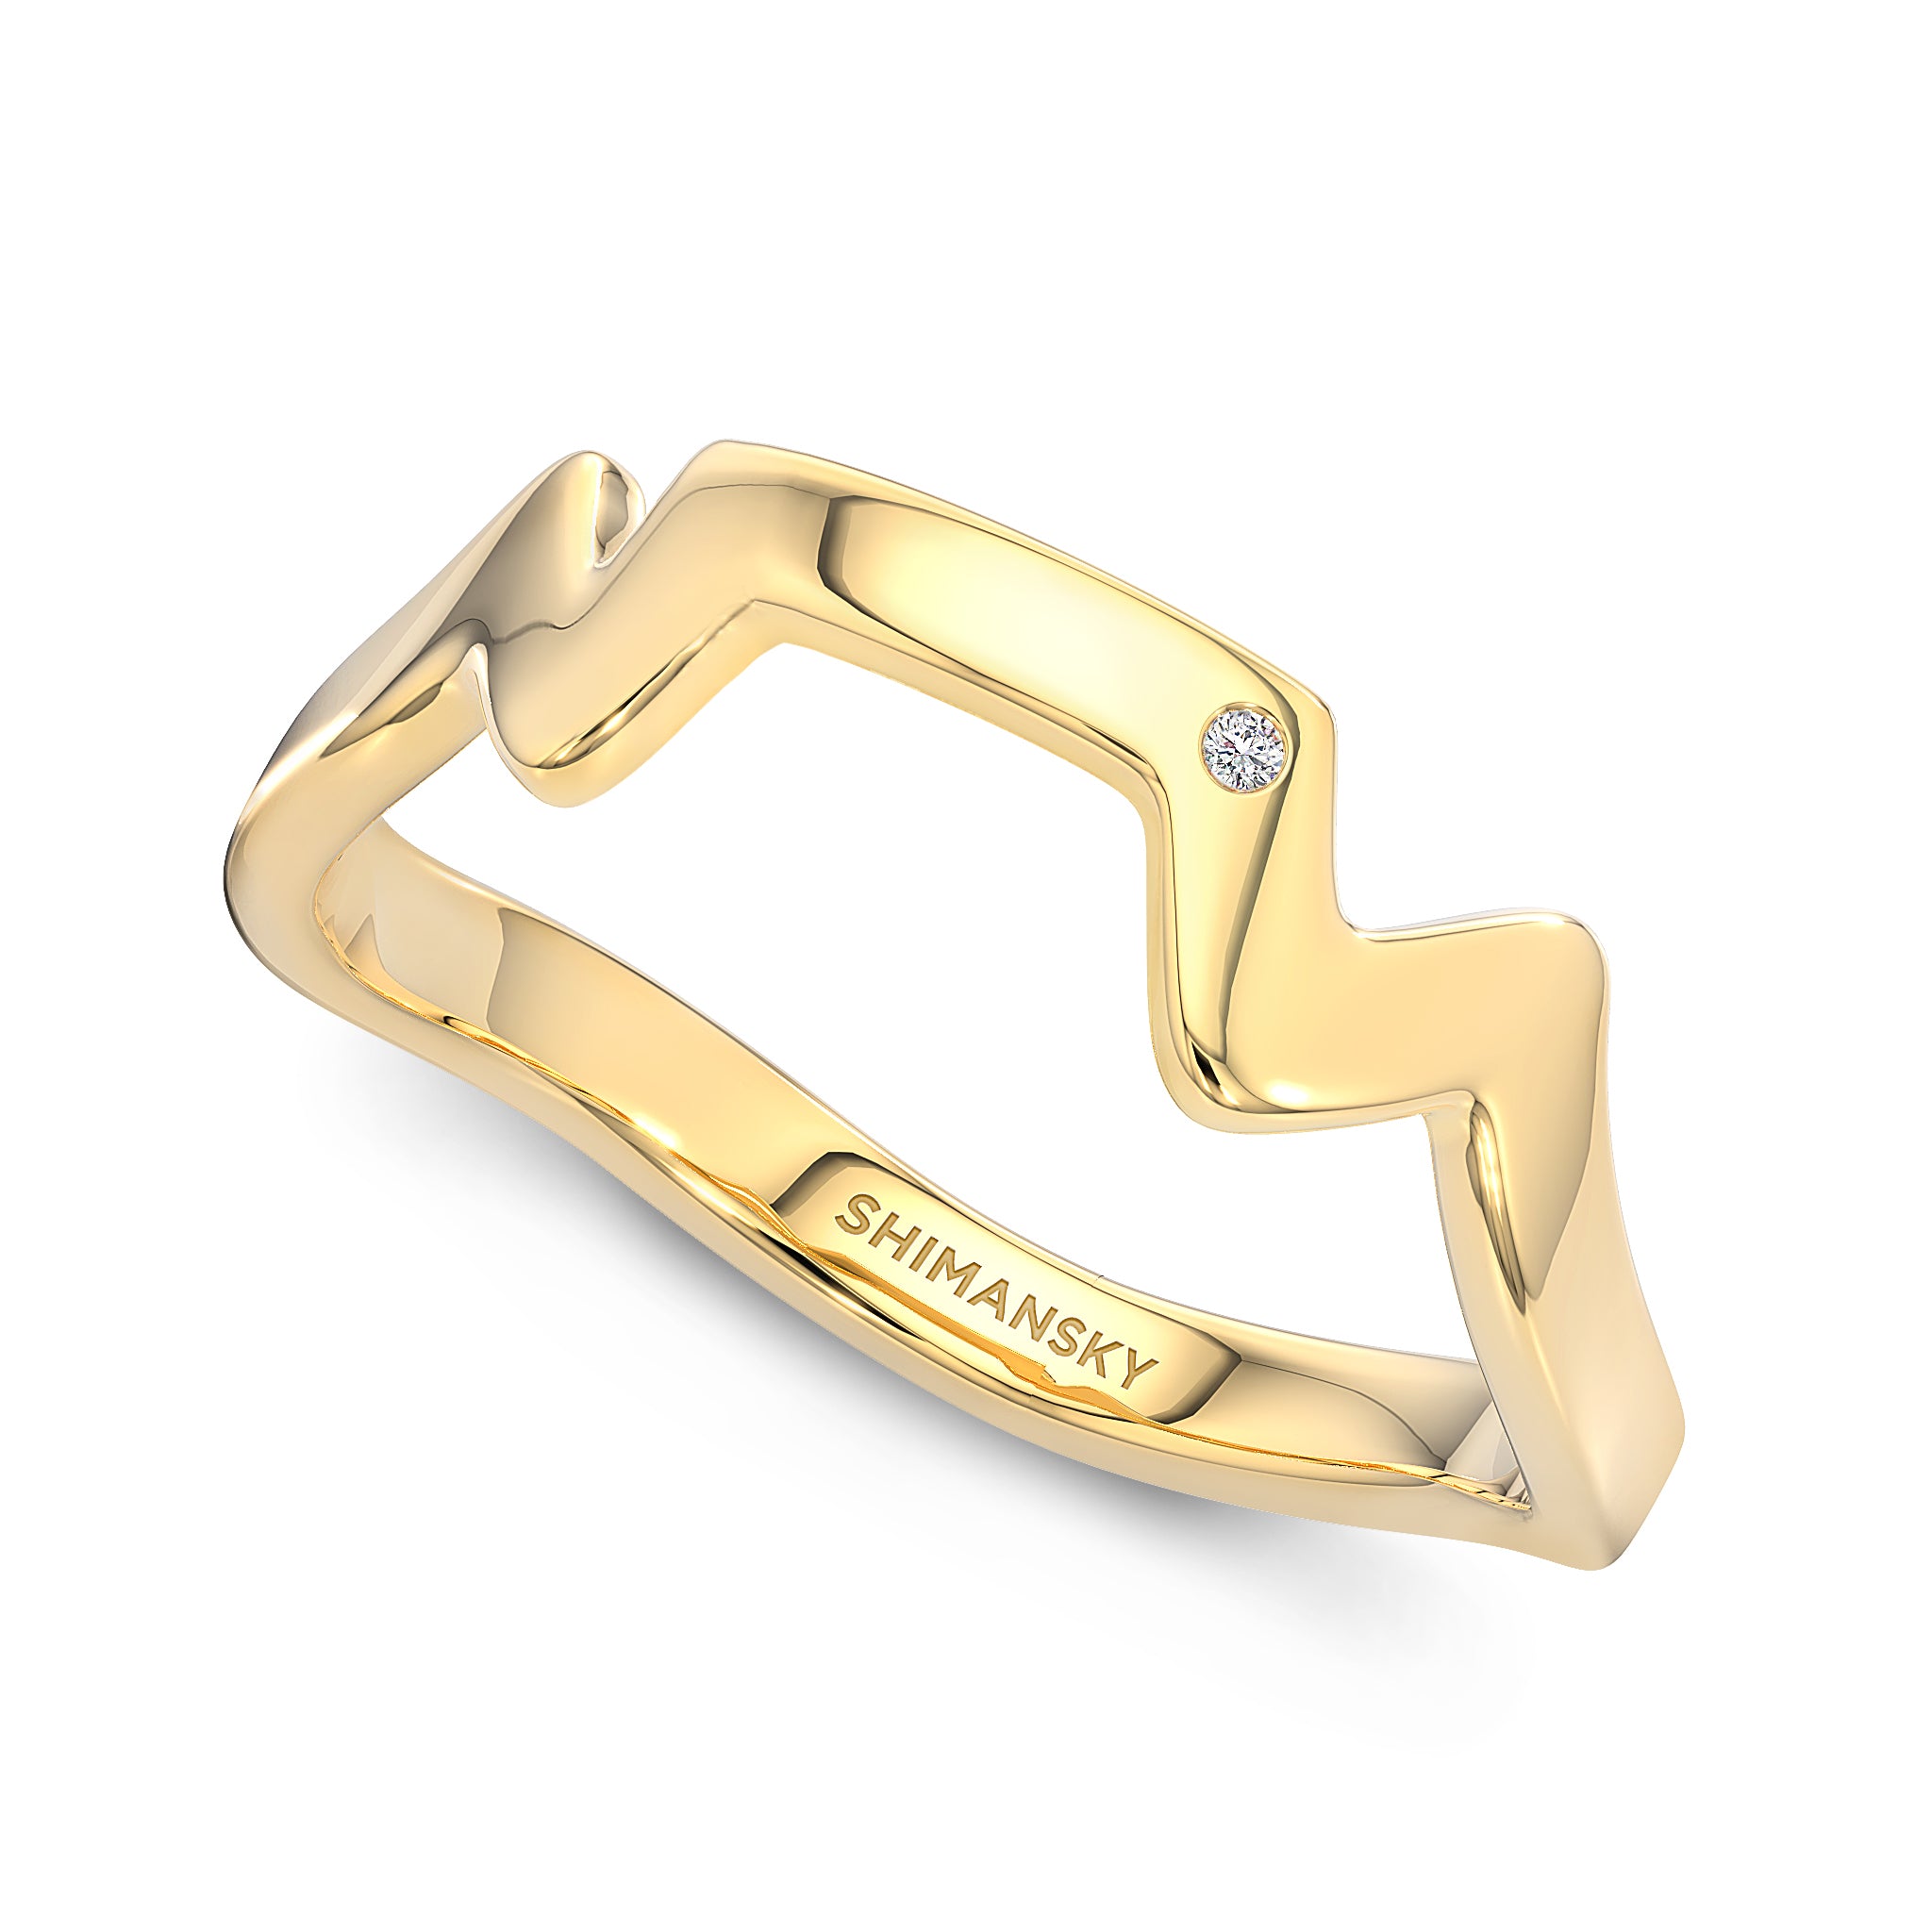 Shimansky - Table Mountain Single Diamond Ring Crafted in 14K Yellow Gold